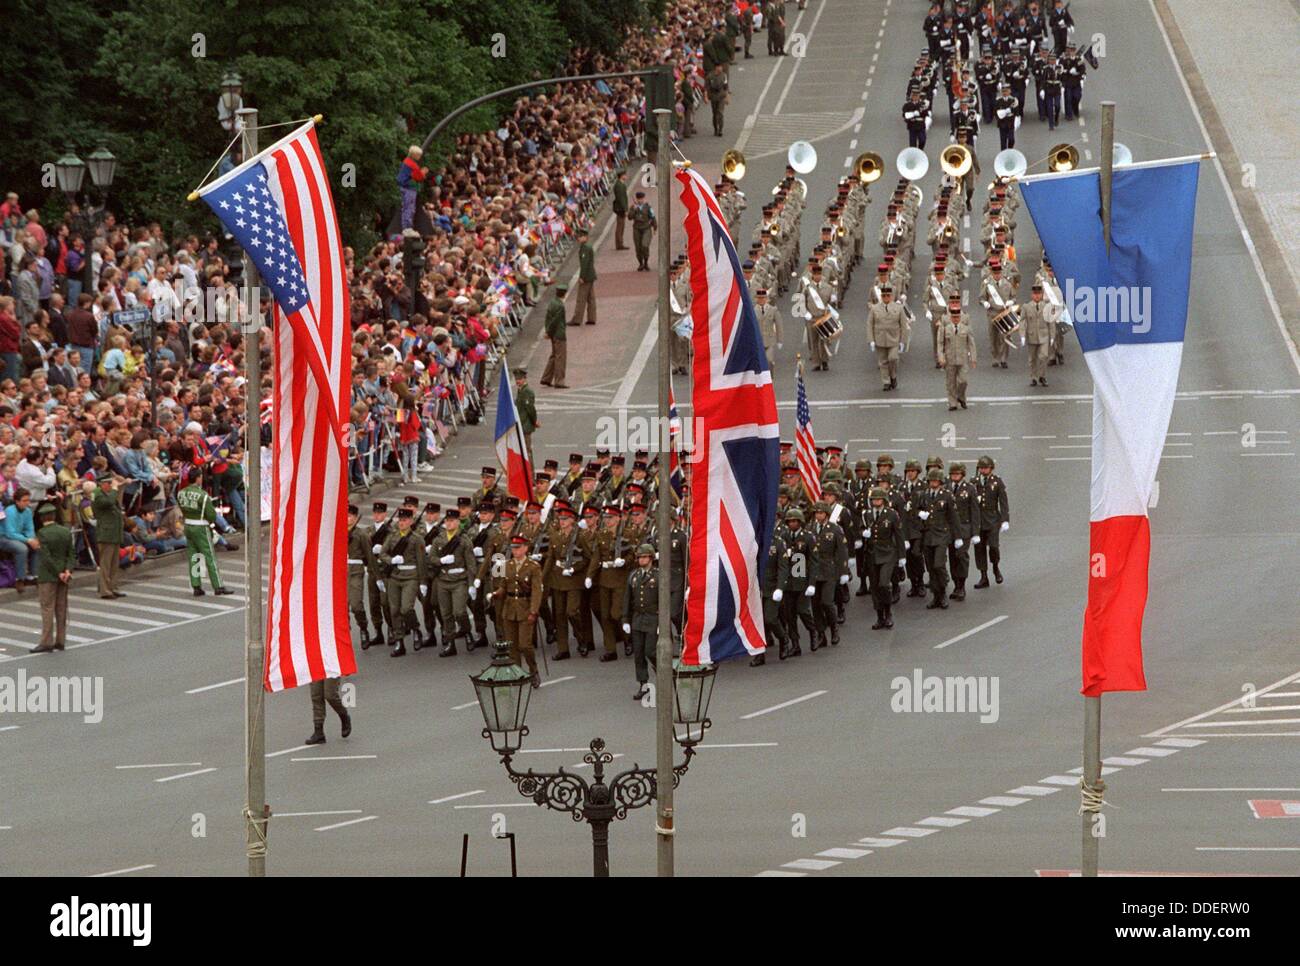 With a final joint military parade the troops of the three Western Allies are saying good-bye to Berlin. Almost 2000 soldiers - 750 Americans, 600 Brits and 600 Frenchman - parade alongside an applauding audience down the flag-decorated Straße des 17. Juni in Berlin. Stock Photo